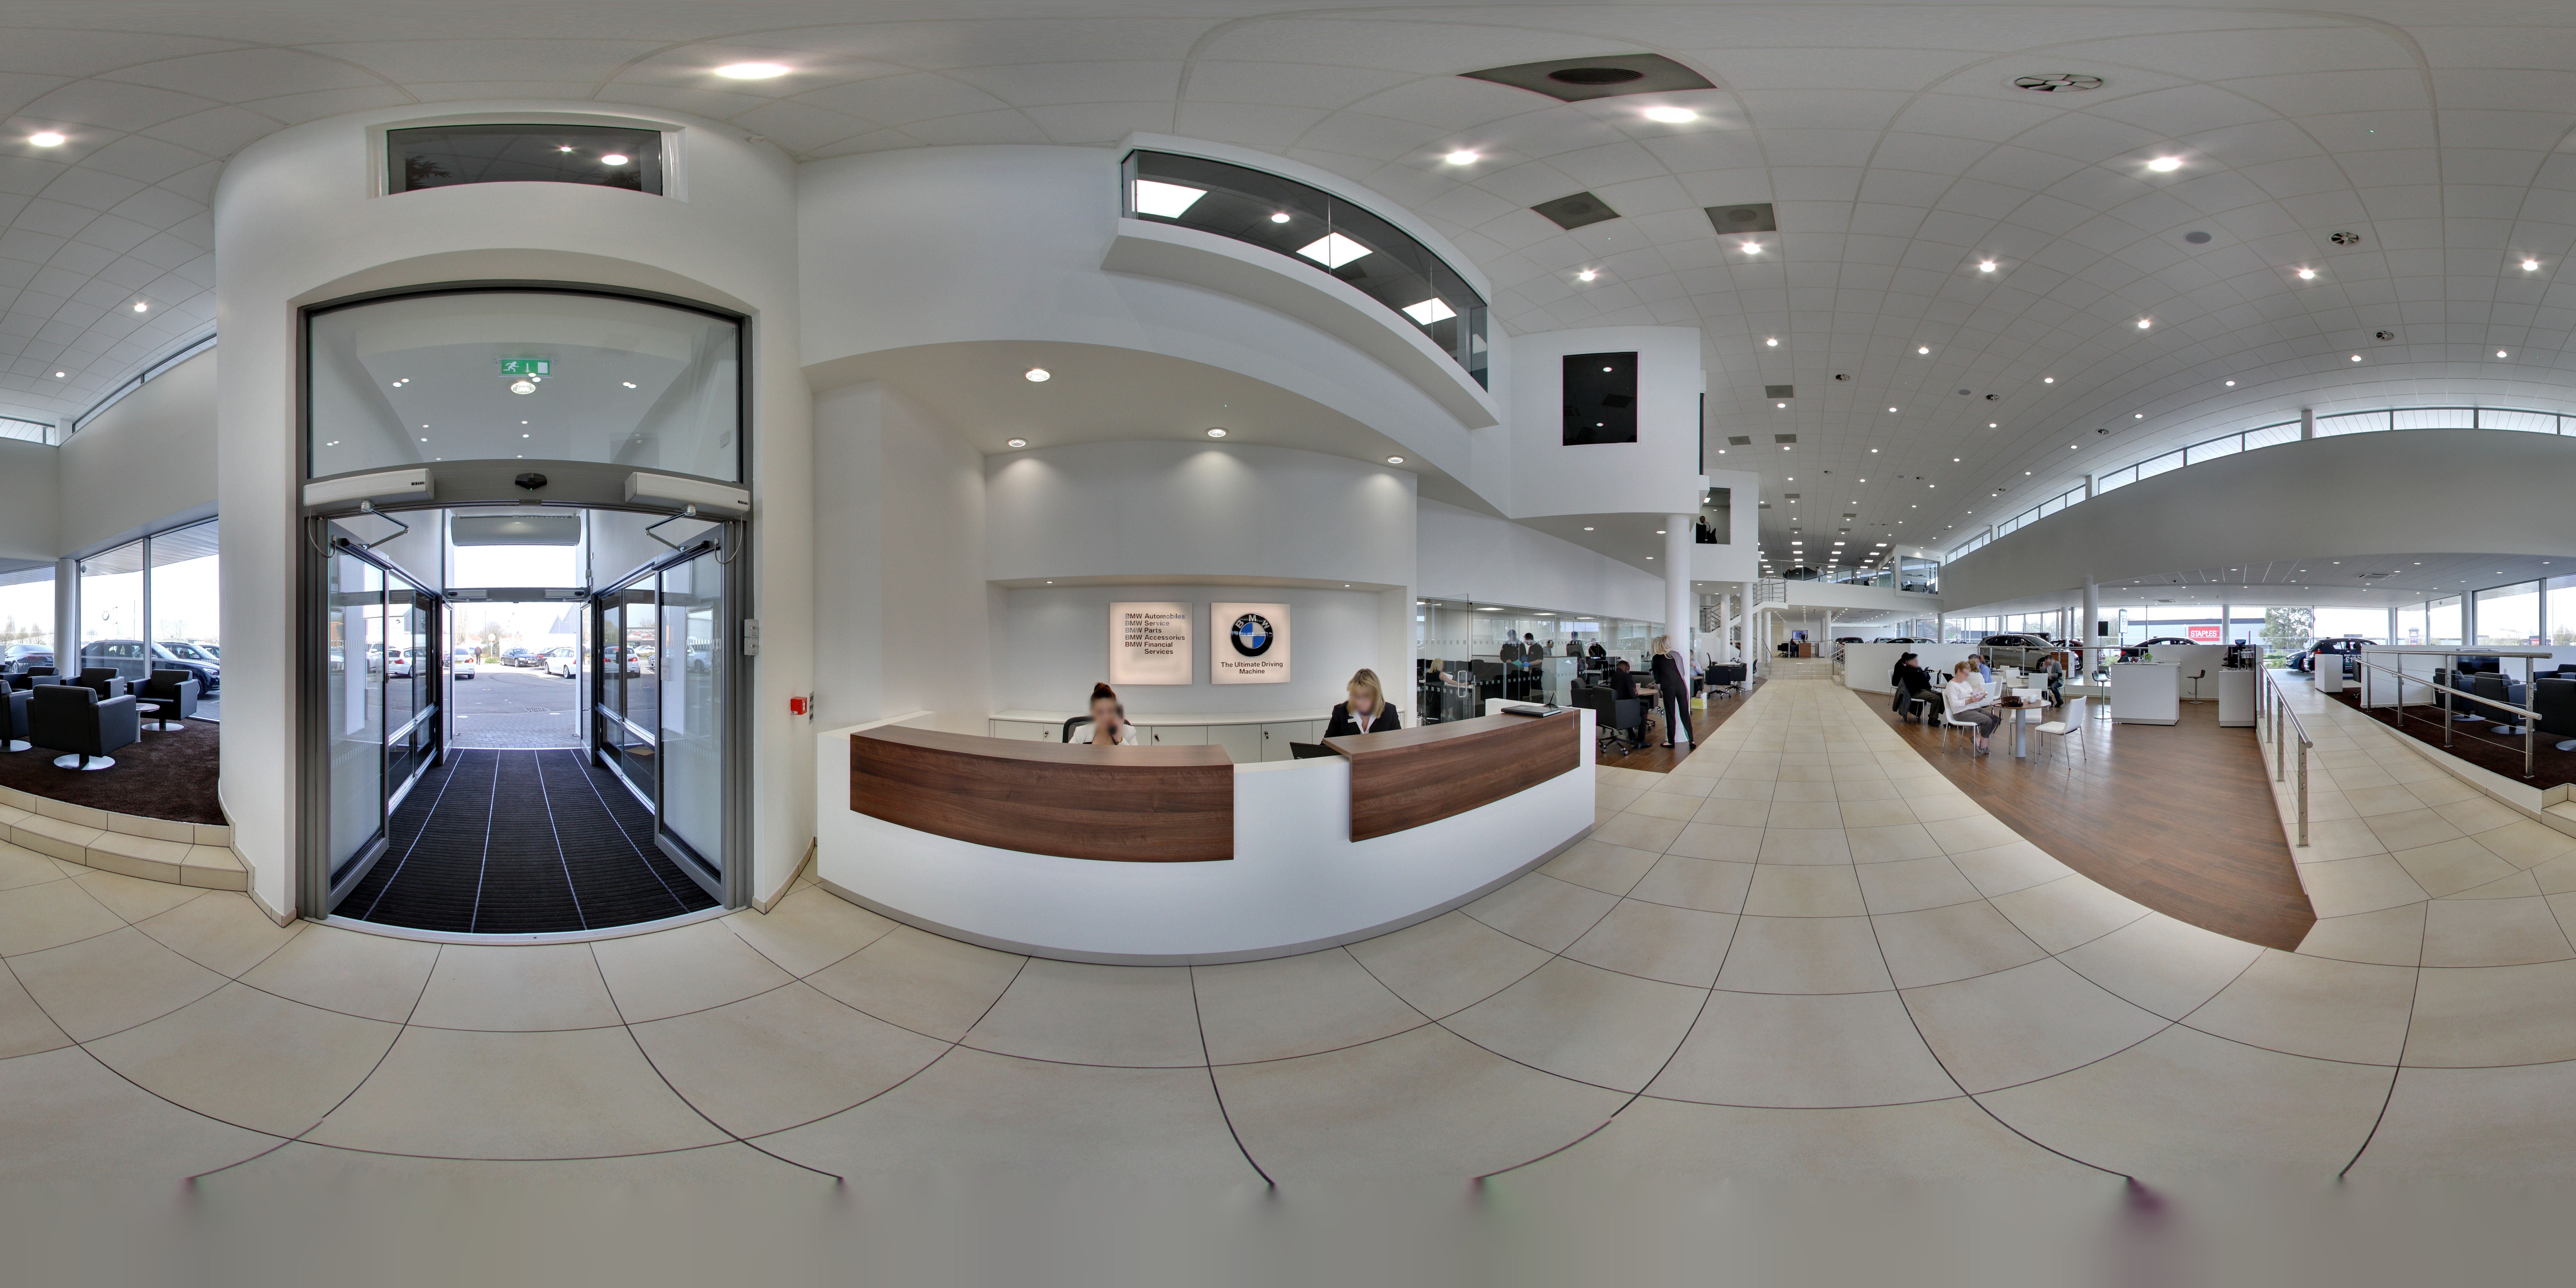 Images Sytner Coventry BMW